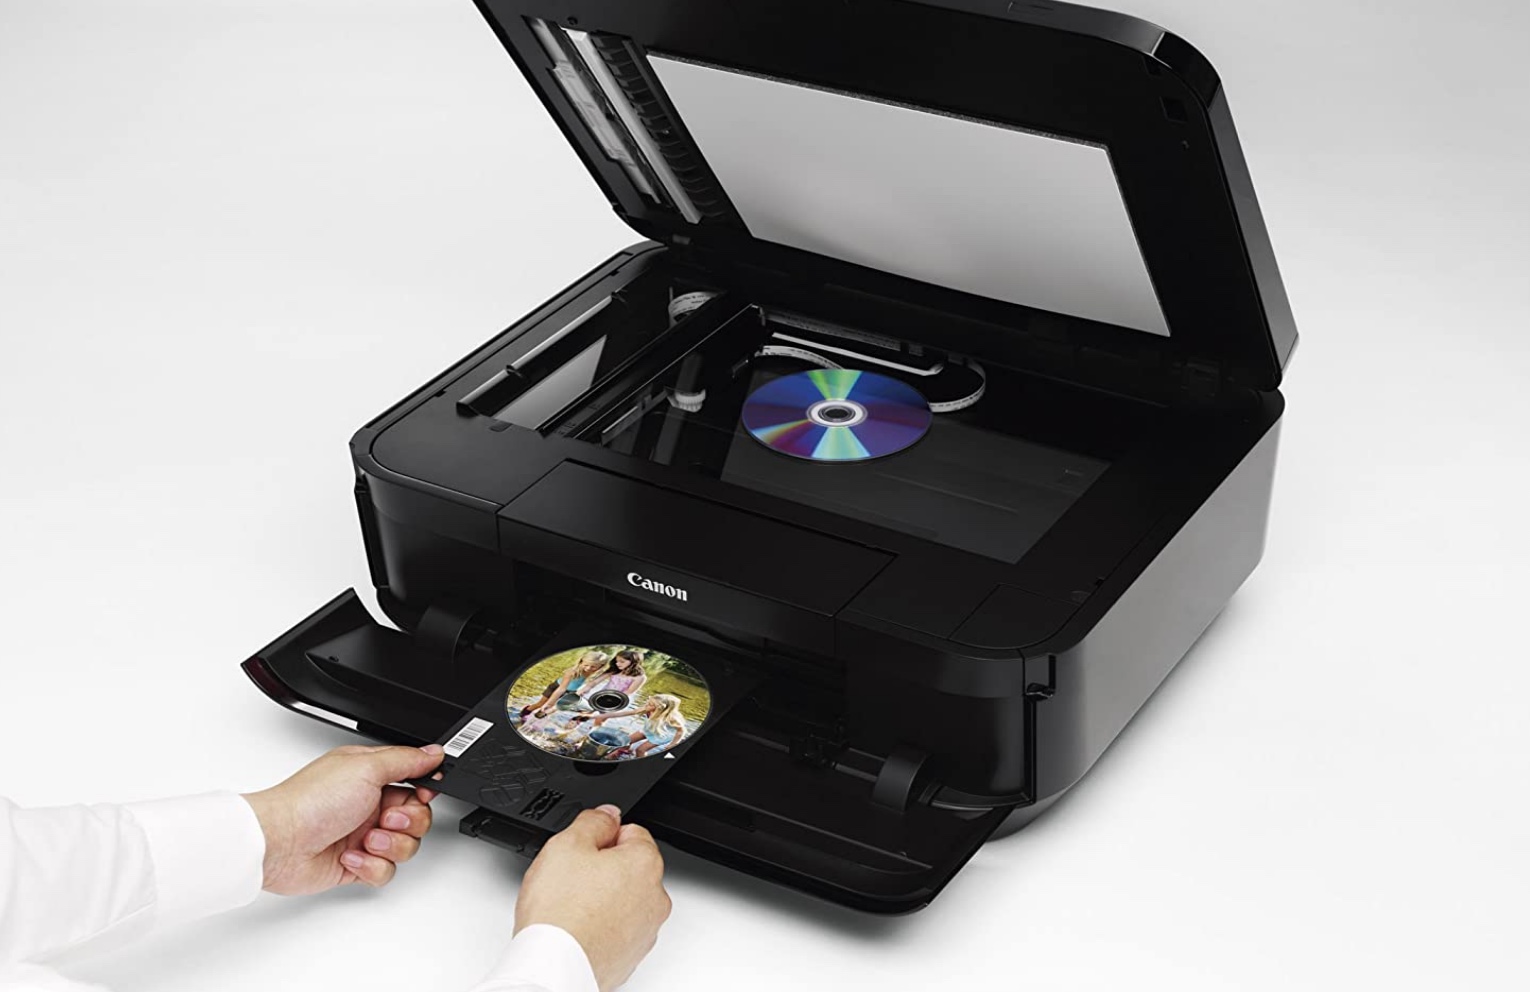 cd-dvd-printers-with-direct-disc-printing-capability-2023-videolane-com